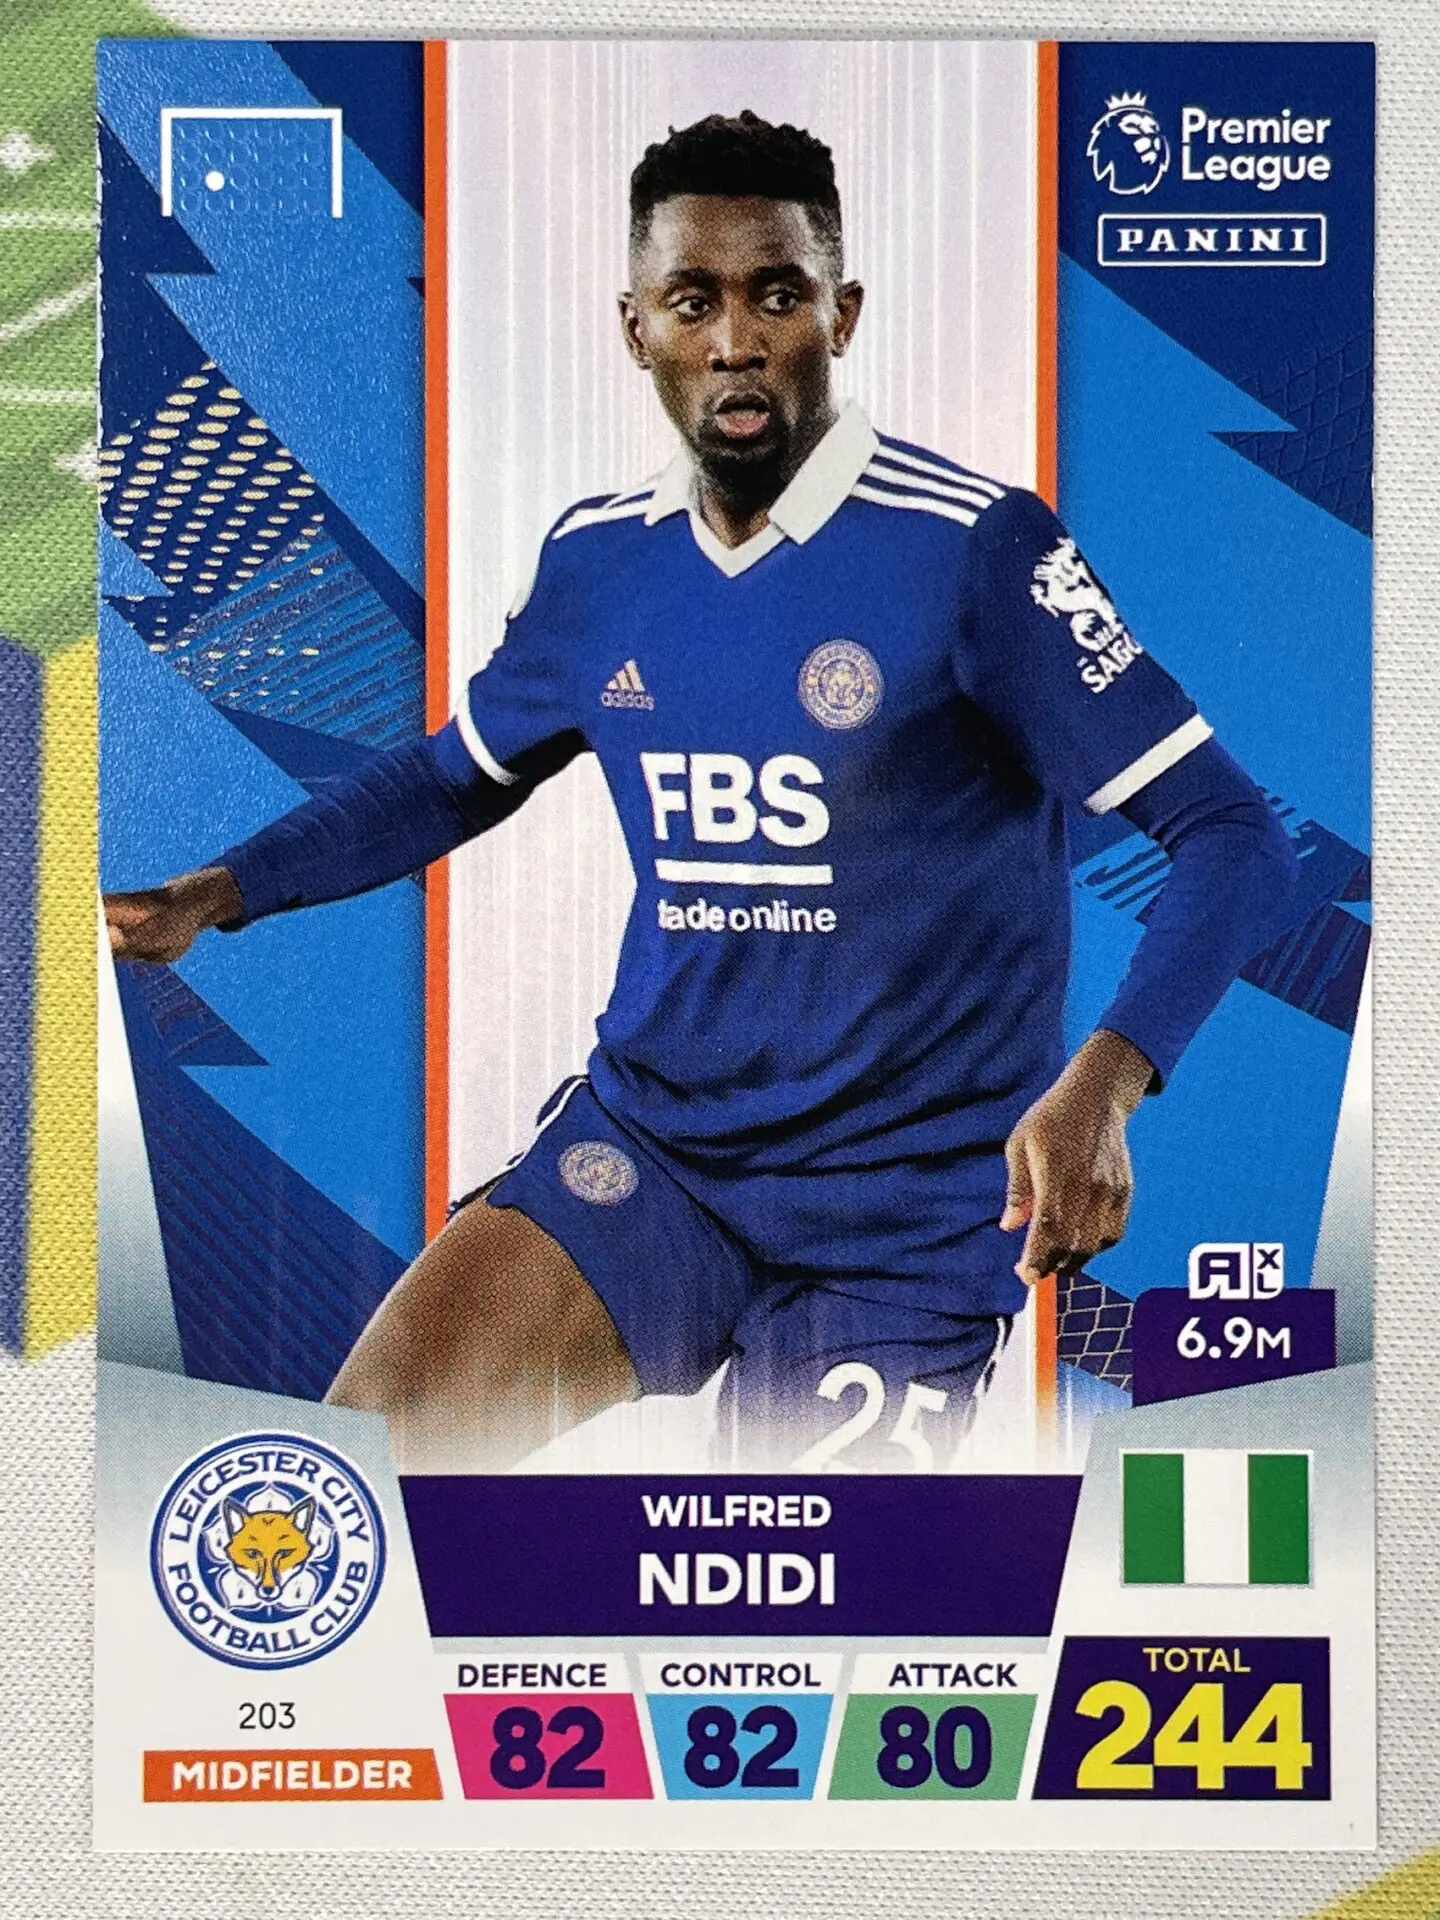 2016 Topps Premier League Wilfred Ndidi /100 42 Leicester RC Rookie ディディ　100枚限定　レスター ルーキー